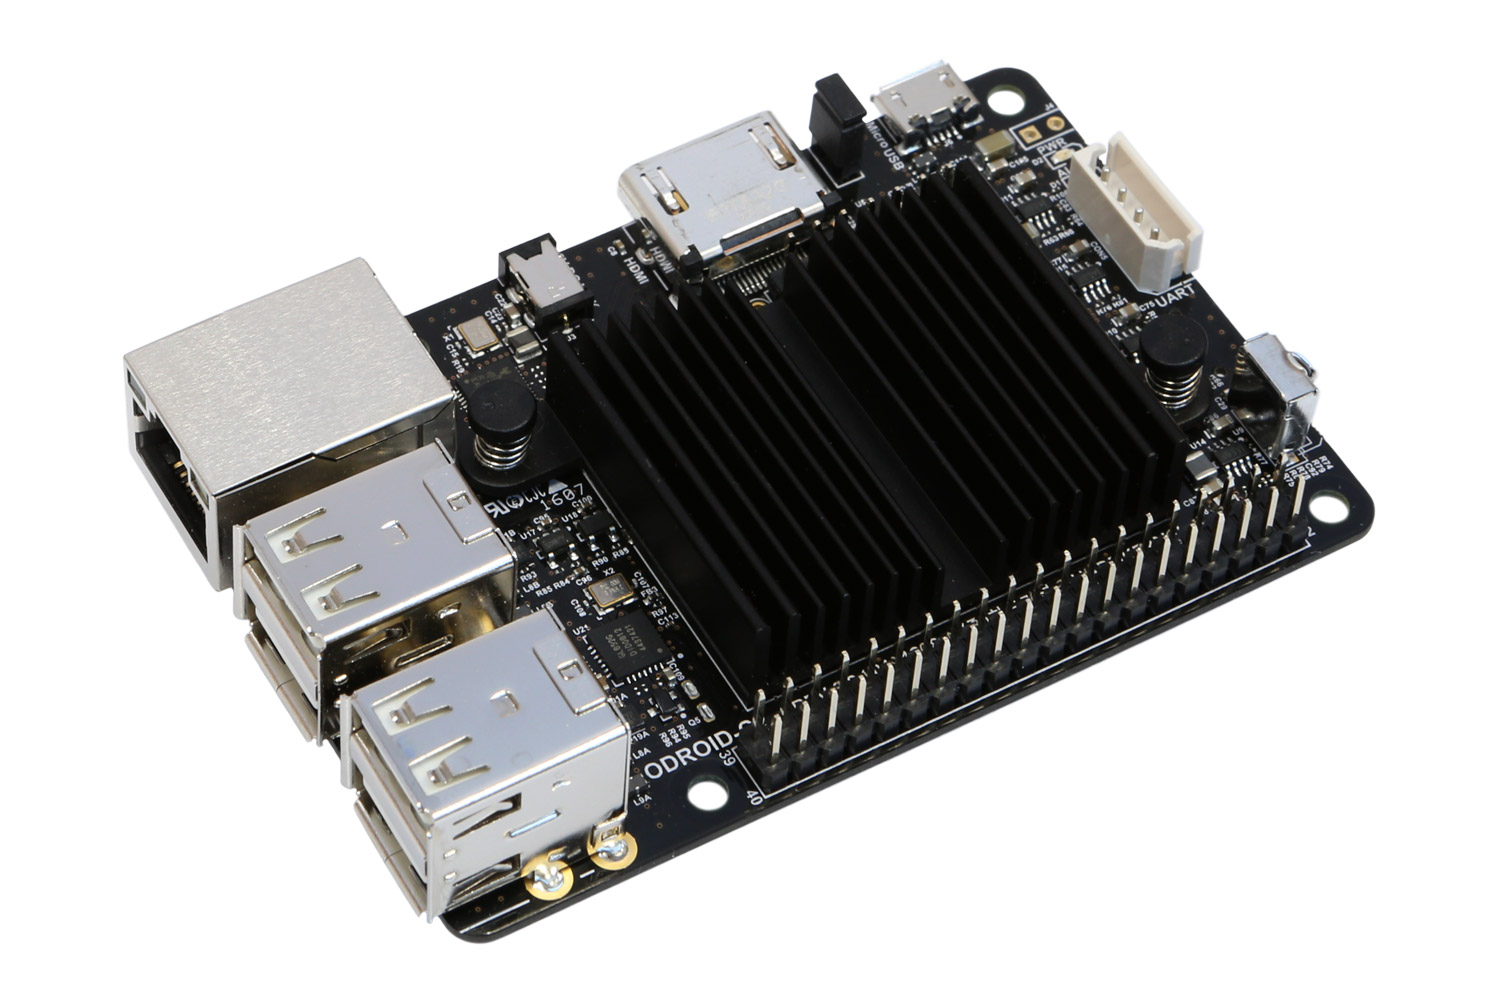 c2 offers competitive specs to raspberry pi odroidc2